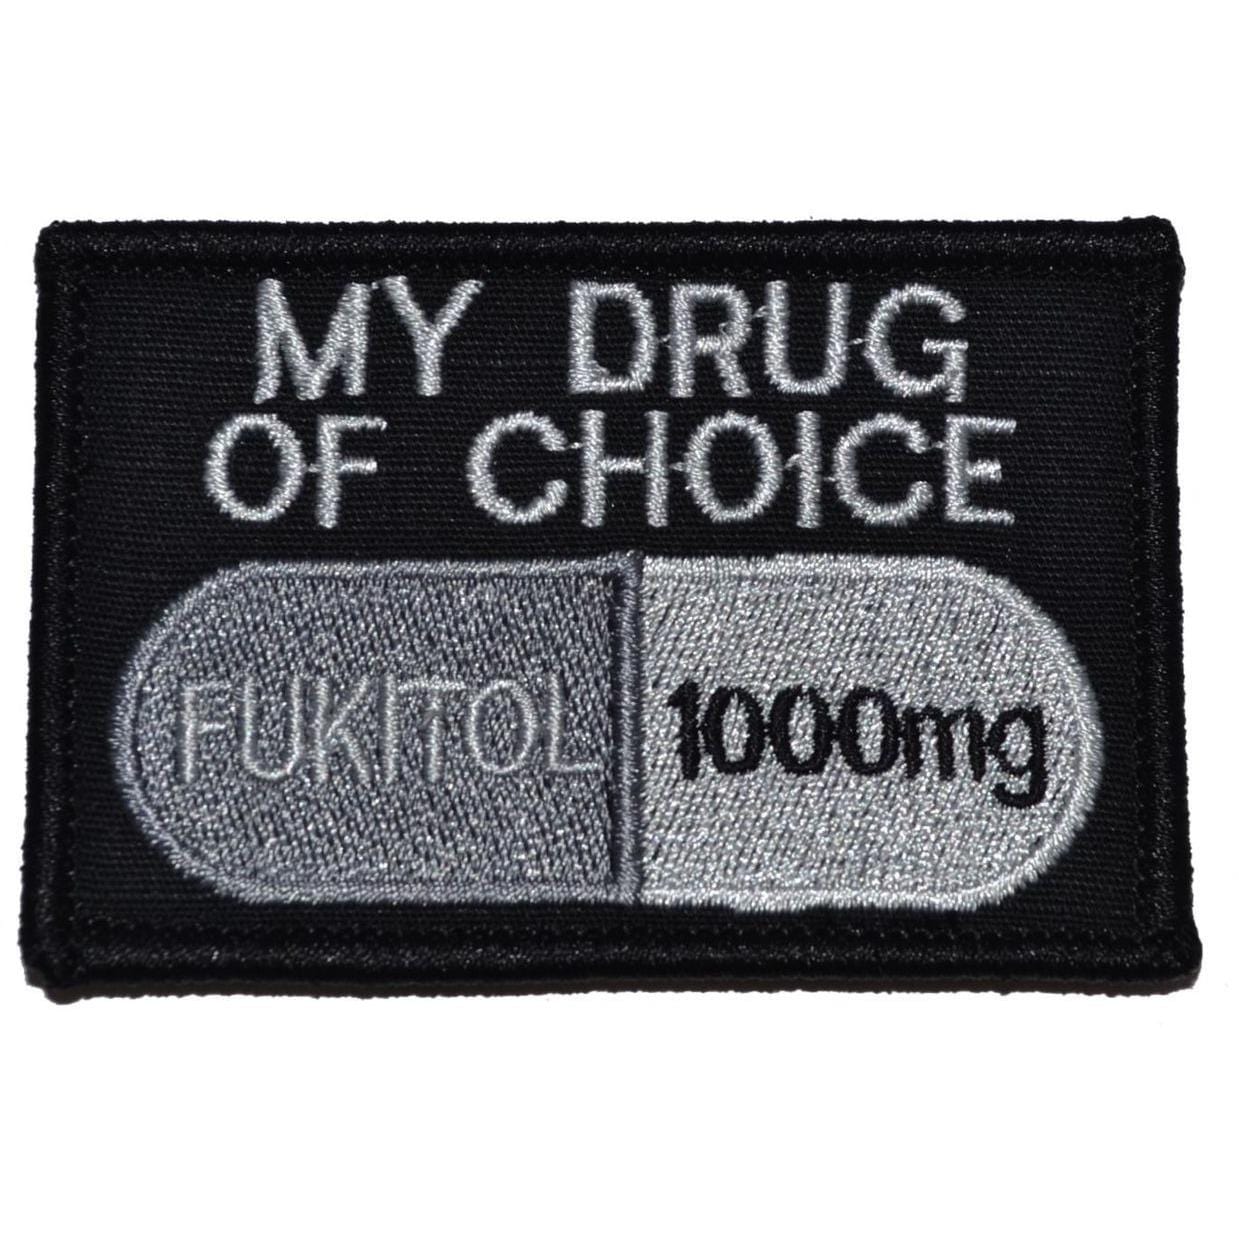 Tactical Gear Junkie Patches Black Fukitol, My Drug of Choice - 2x3 Patch